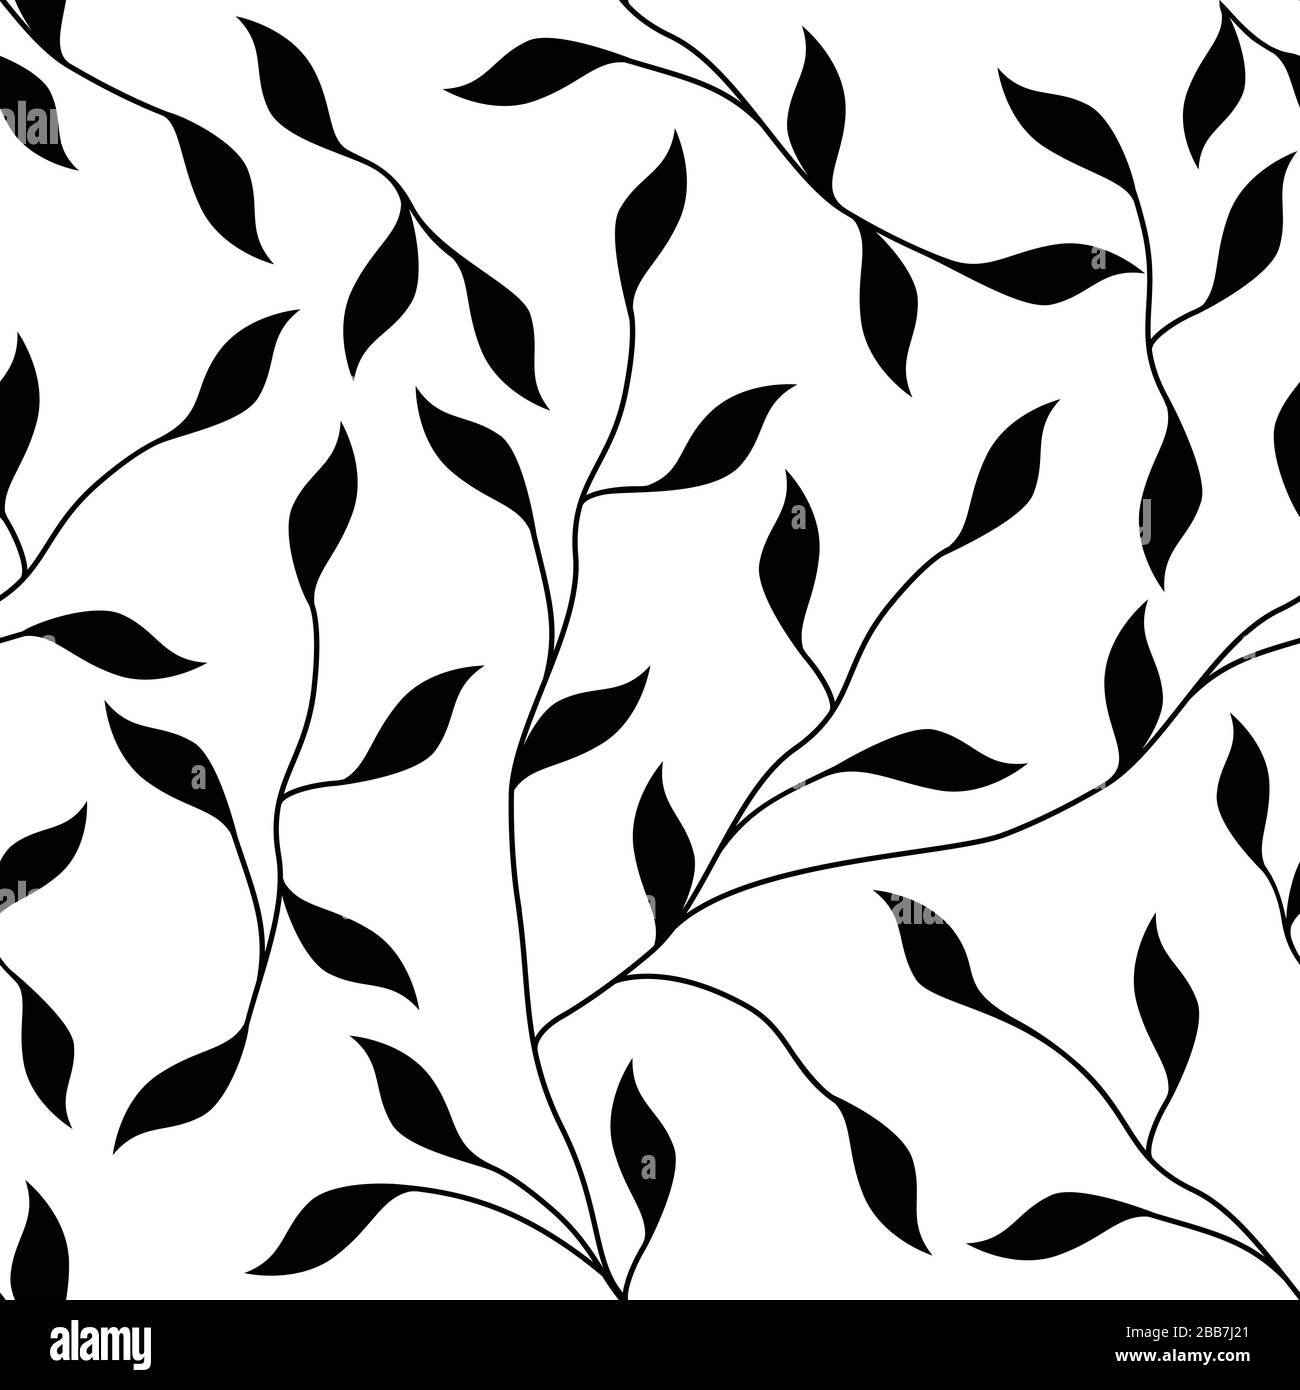 Black and White Leaves and Vines Seamless Repeating Vector Pattern Stock Vector